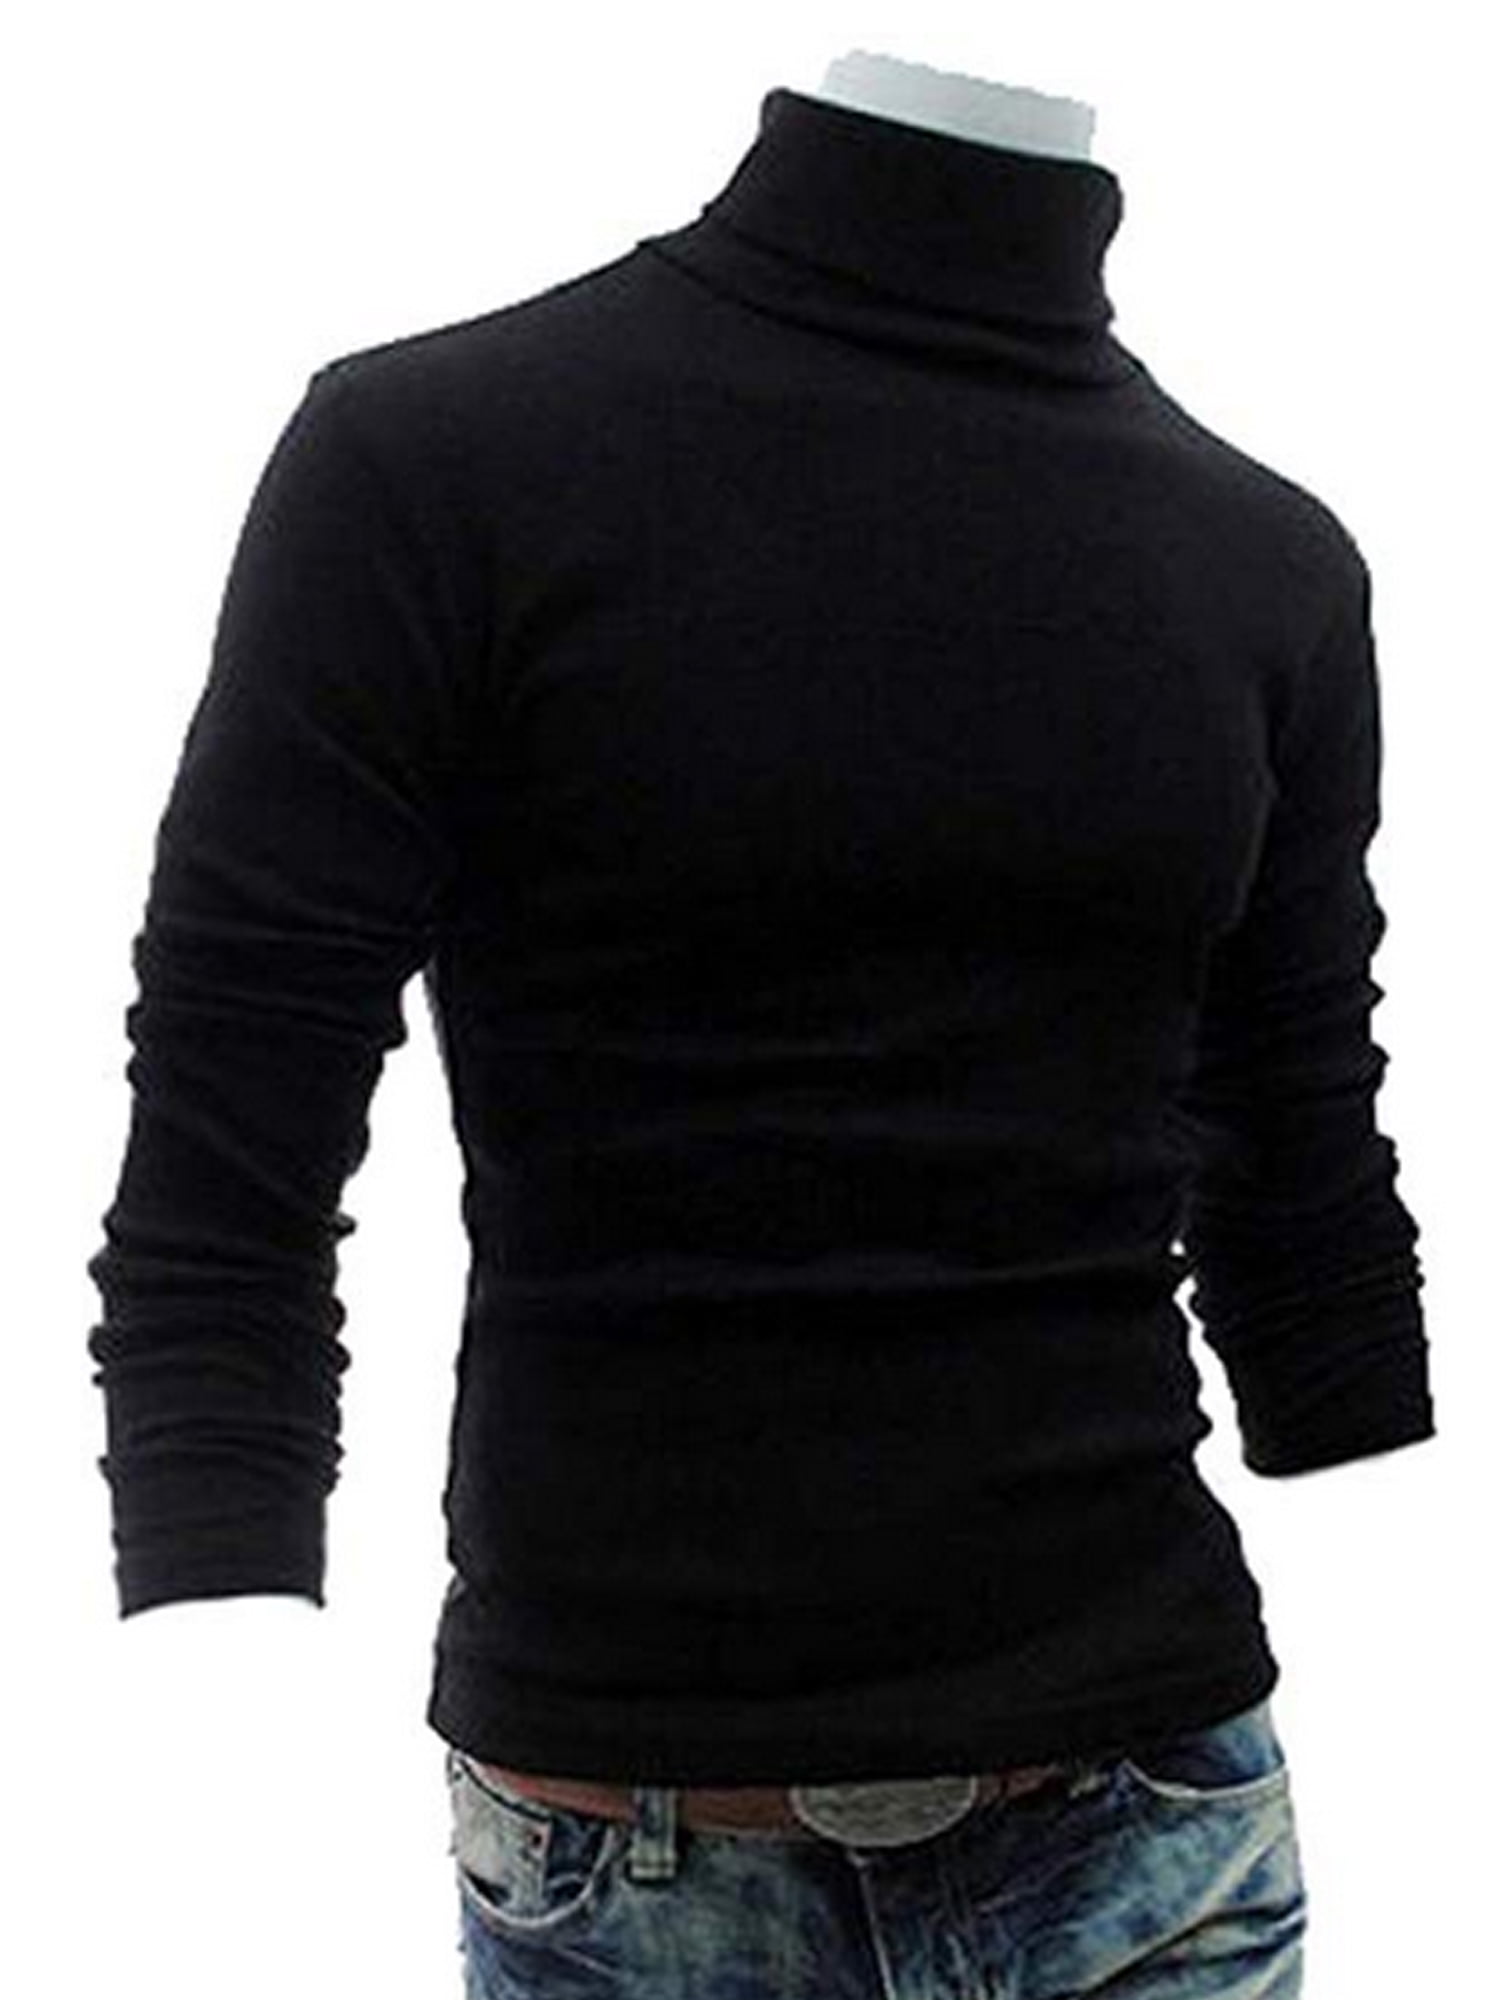 Abetteric Mens Basic Winter Turtleneck Warm Solid Top Pullover Sweater